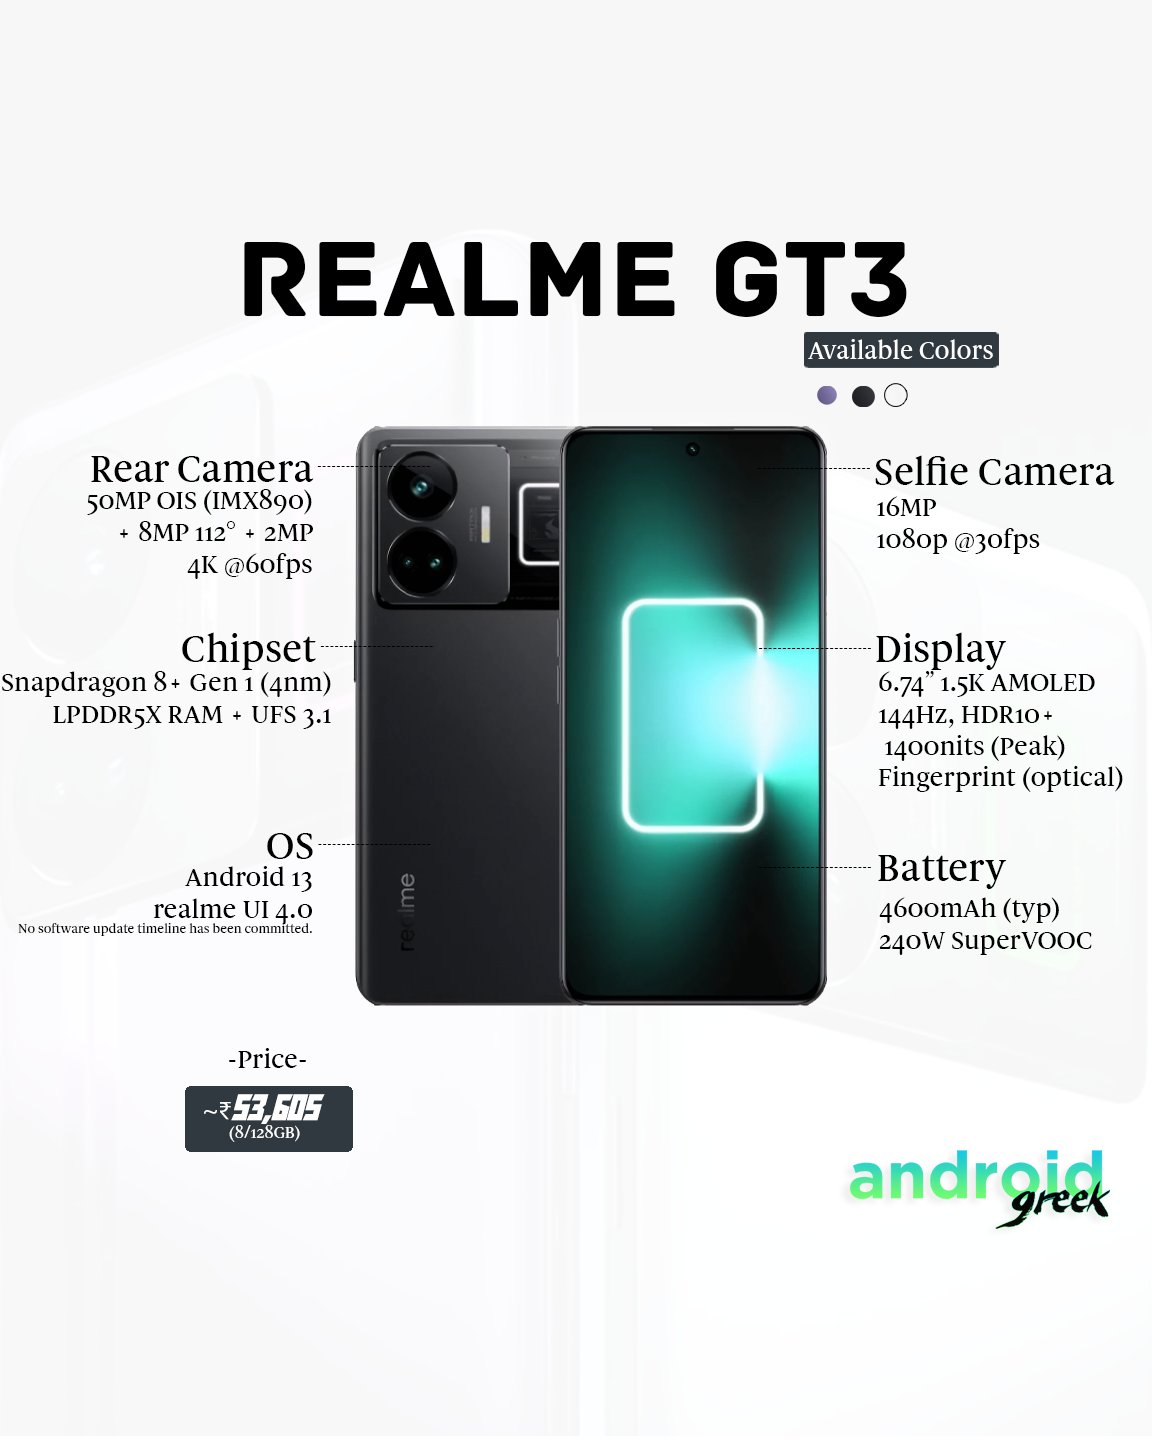 AndroidGreek on X: Realme has announced the GT3, the latest